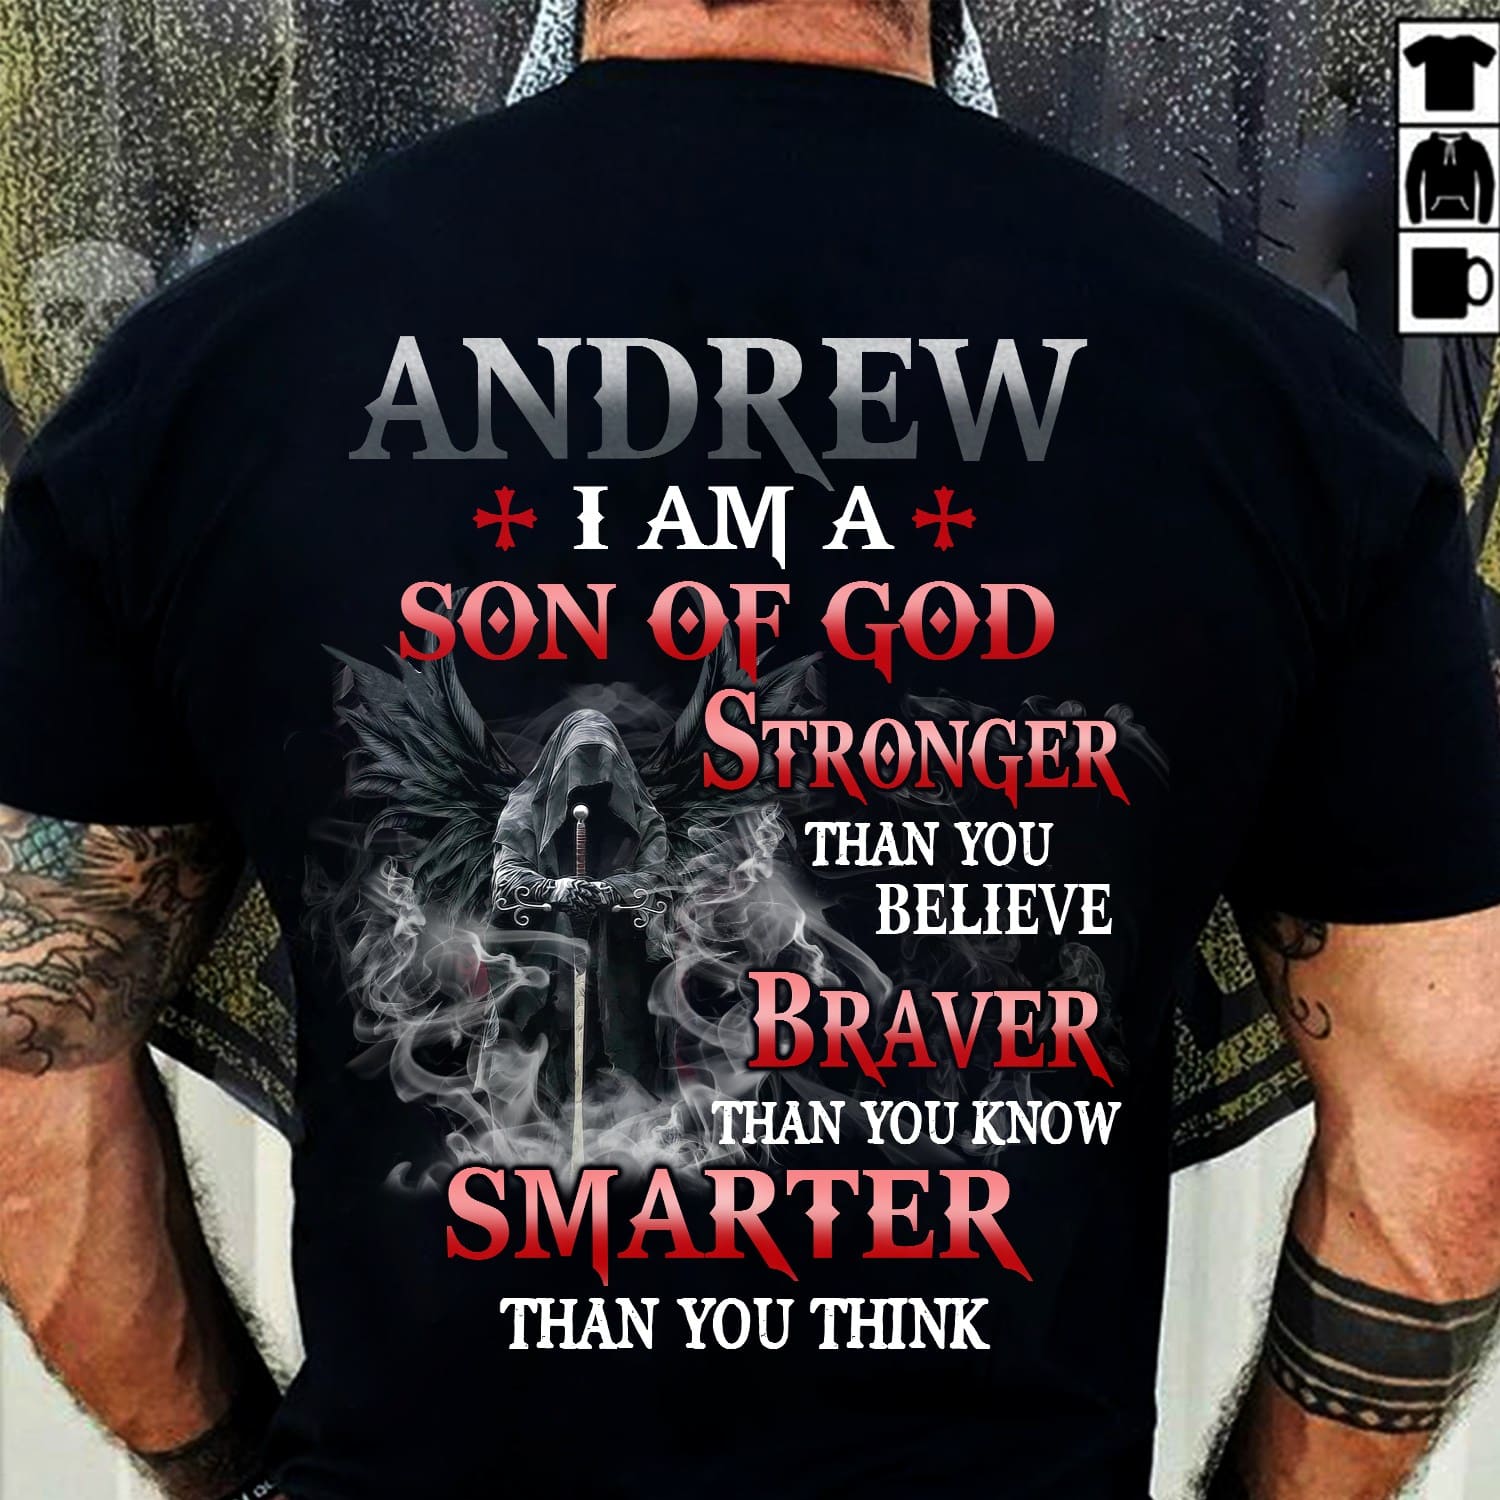 Andrew I am a son of God, stronger than you believe, braver than you know, smarter than you think